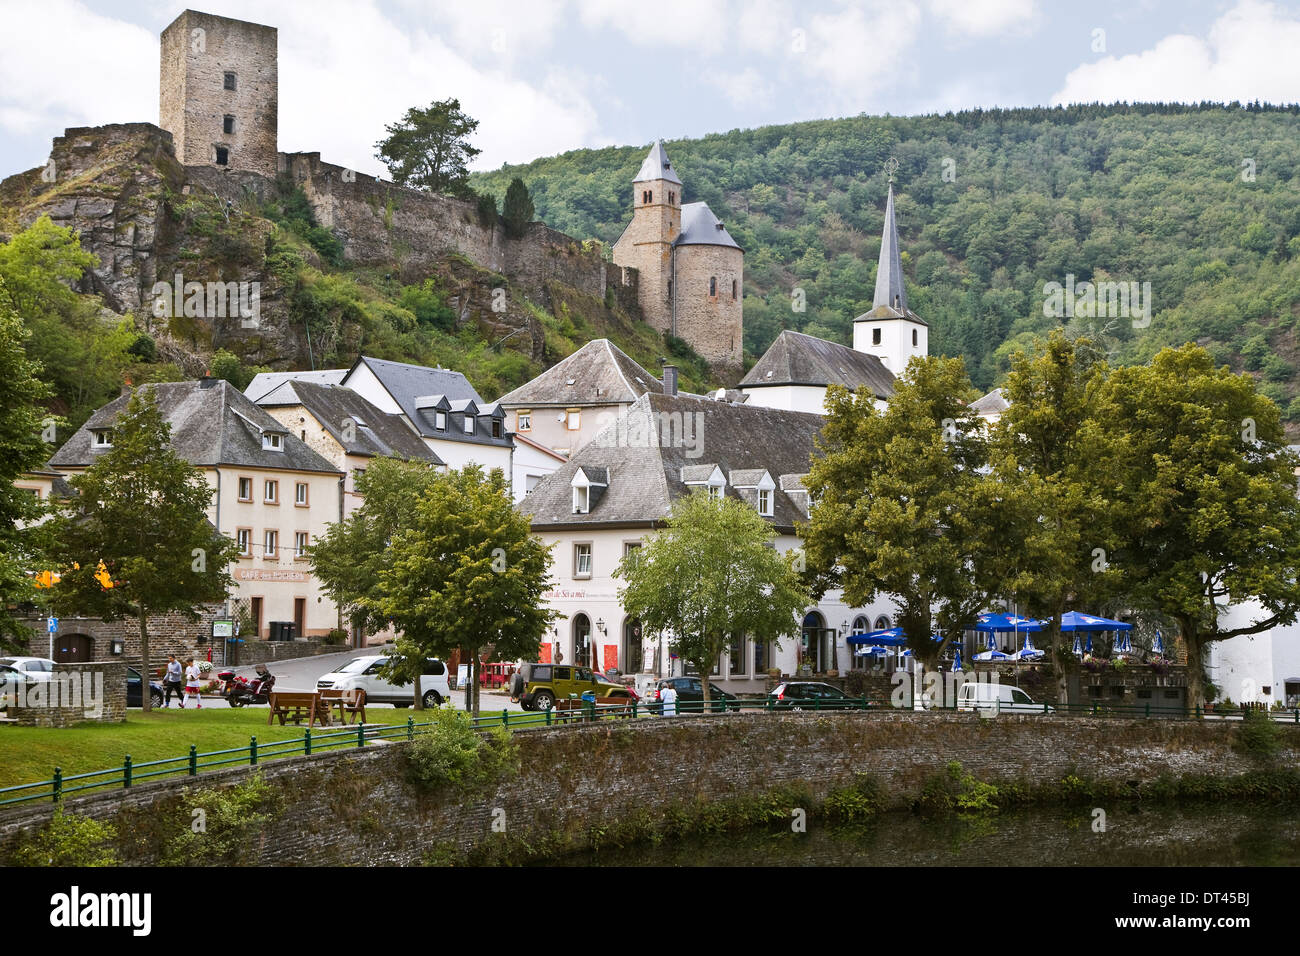 View to Esch-sur-Sûre, Luxembourg, Europe on a cloudy day as seen from the riverside in summer with ruin of old castle on the hilltop Stock Photo